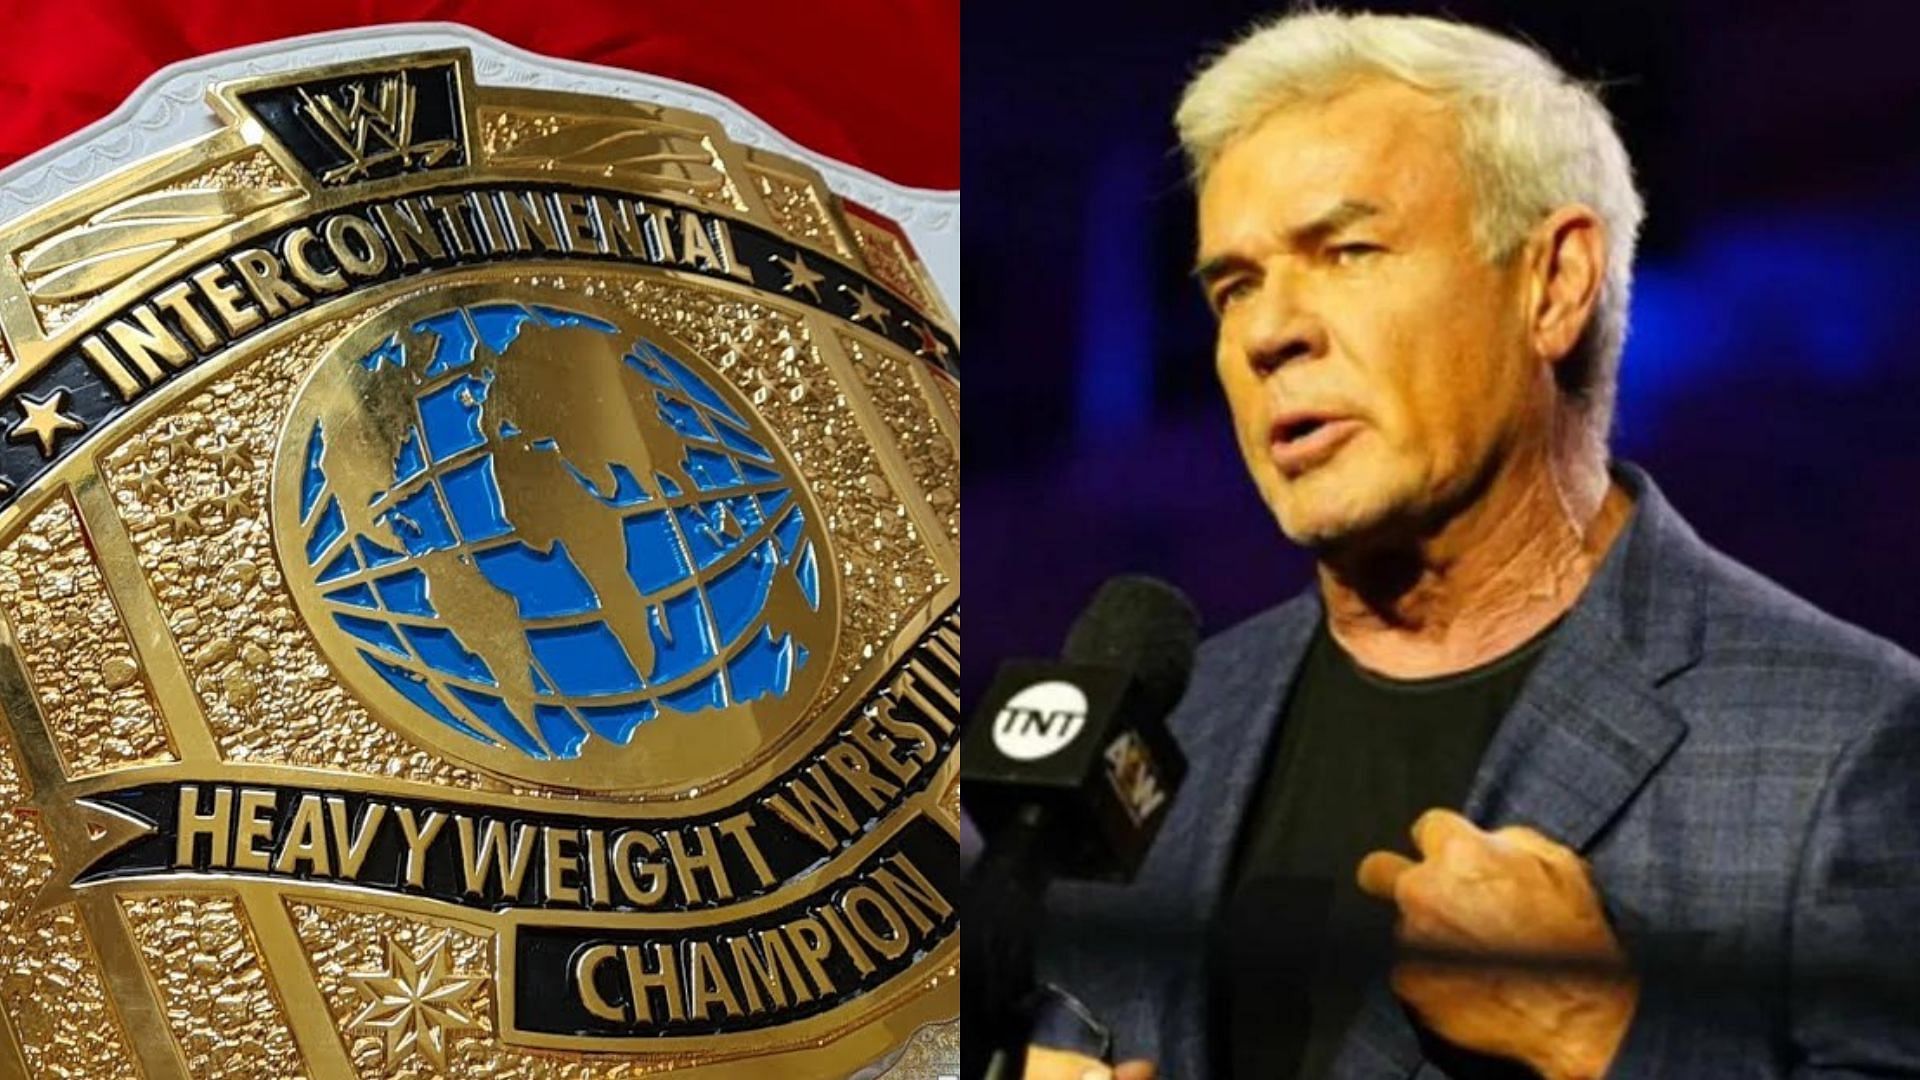 Find out which former Intercontinental Champion has offered his service to AEW